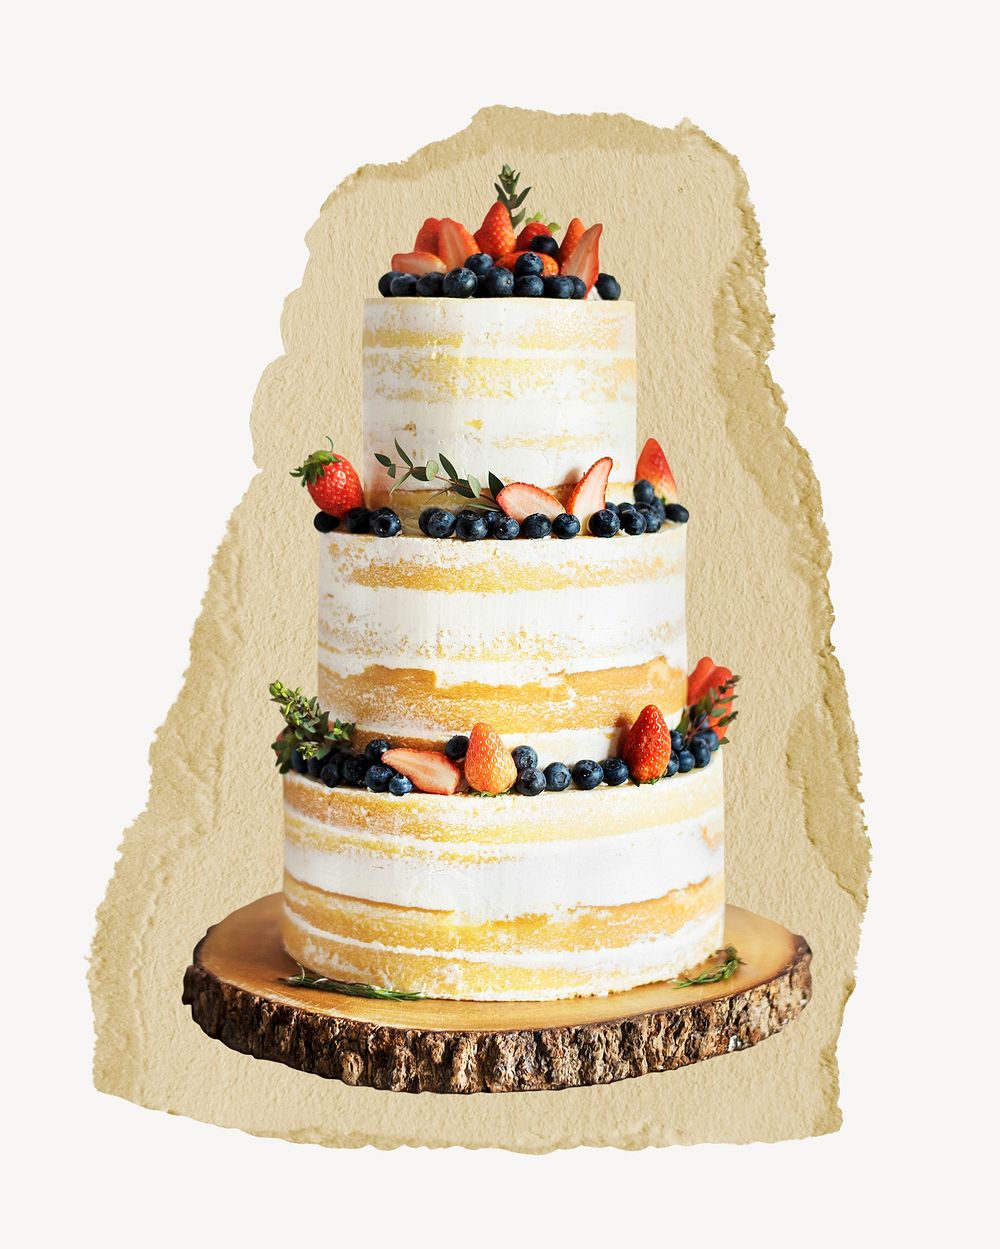 Wedding cake, ripped paper collage element